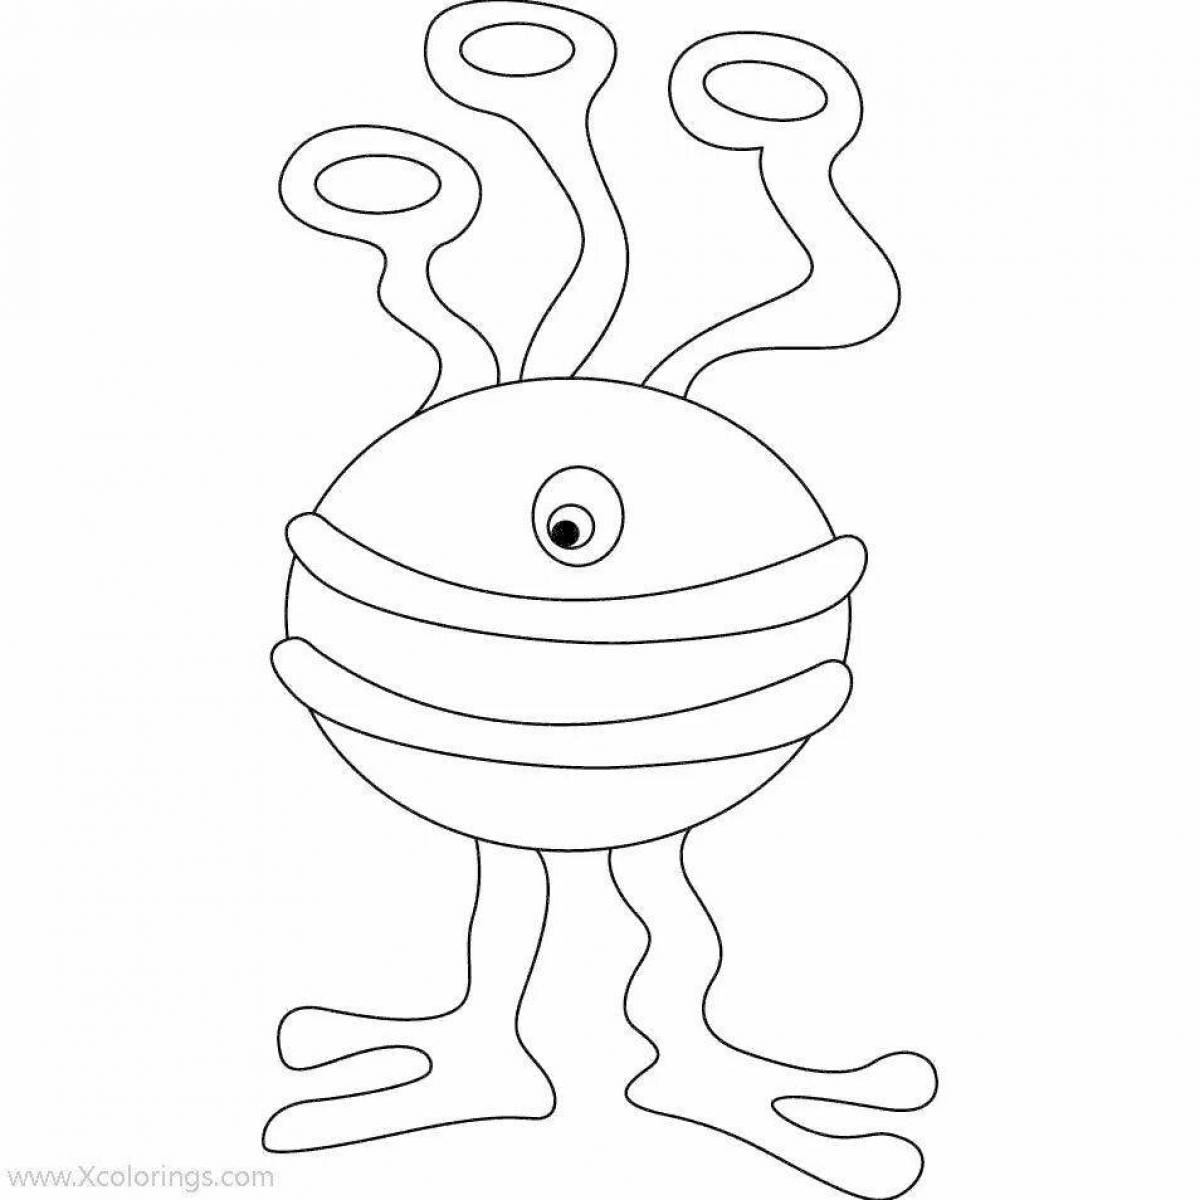 Adorable alien coloring book for kids